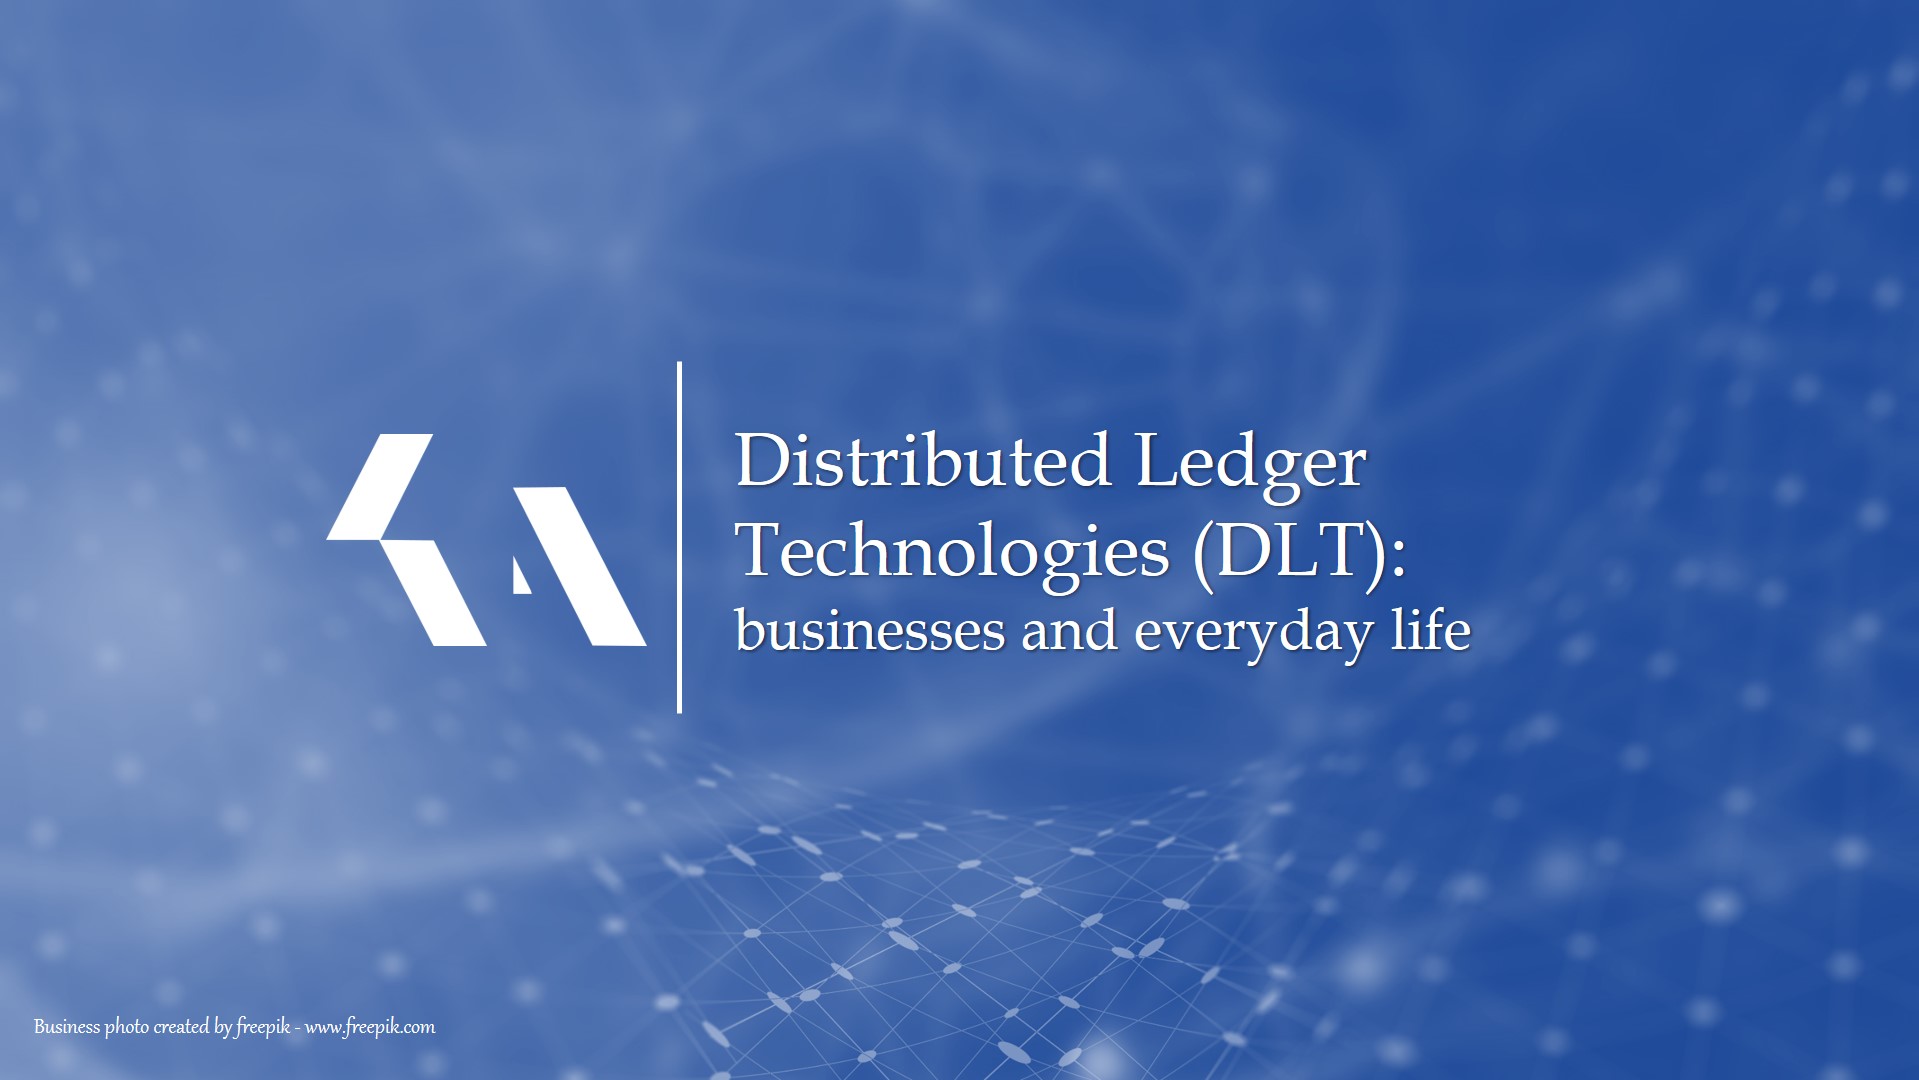 Distributed Ledger Technologies (DLT): businesses and everyday life